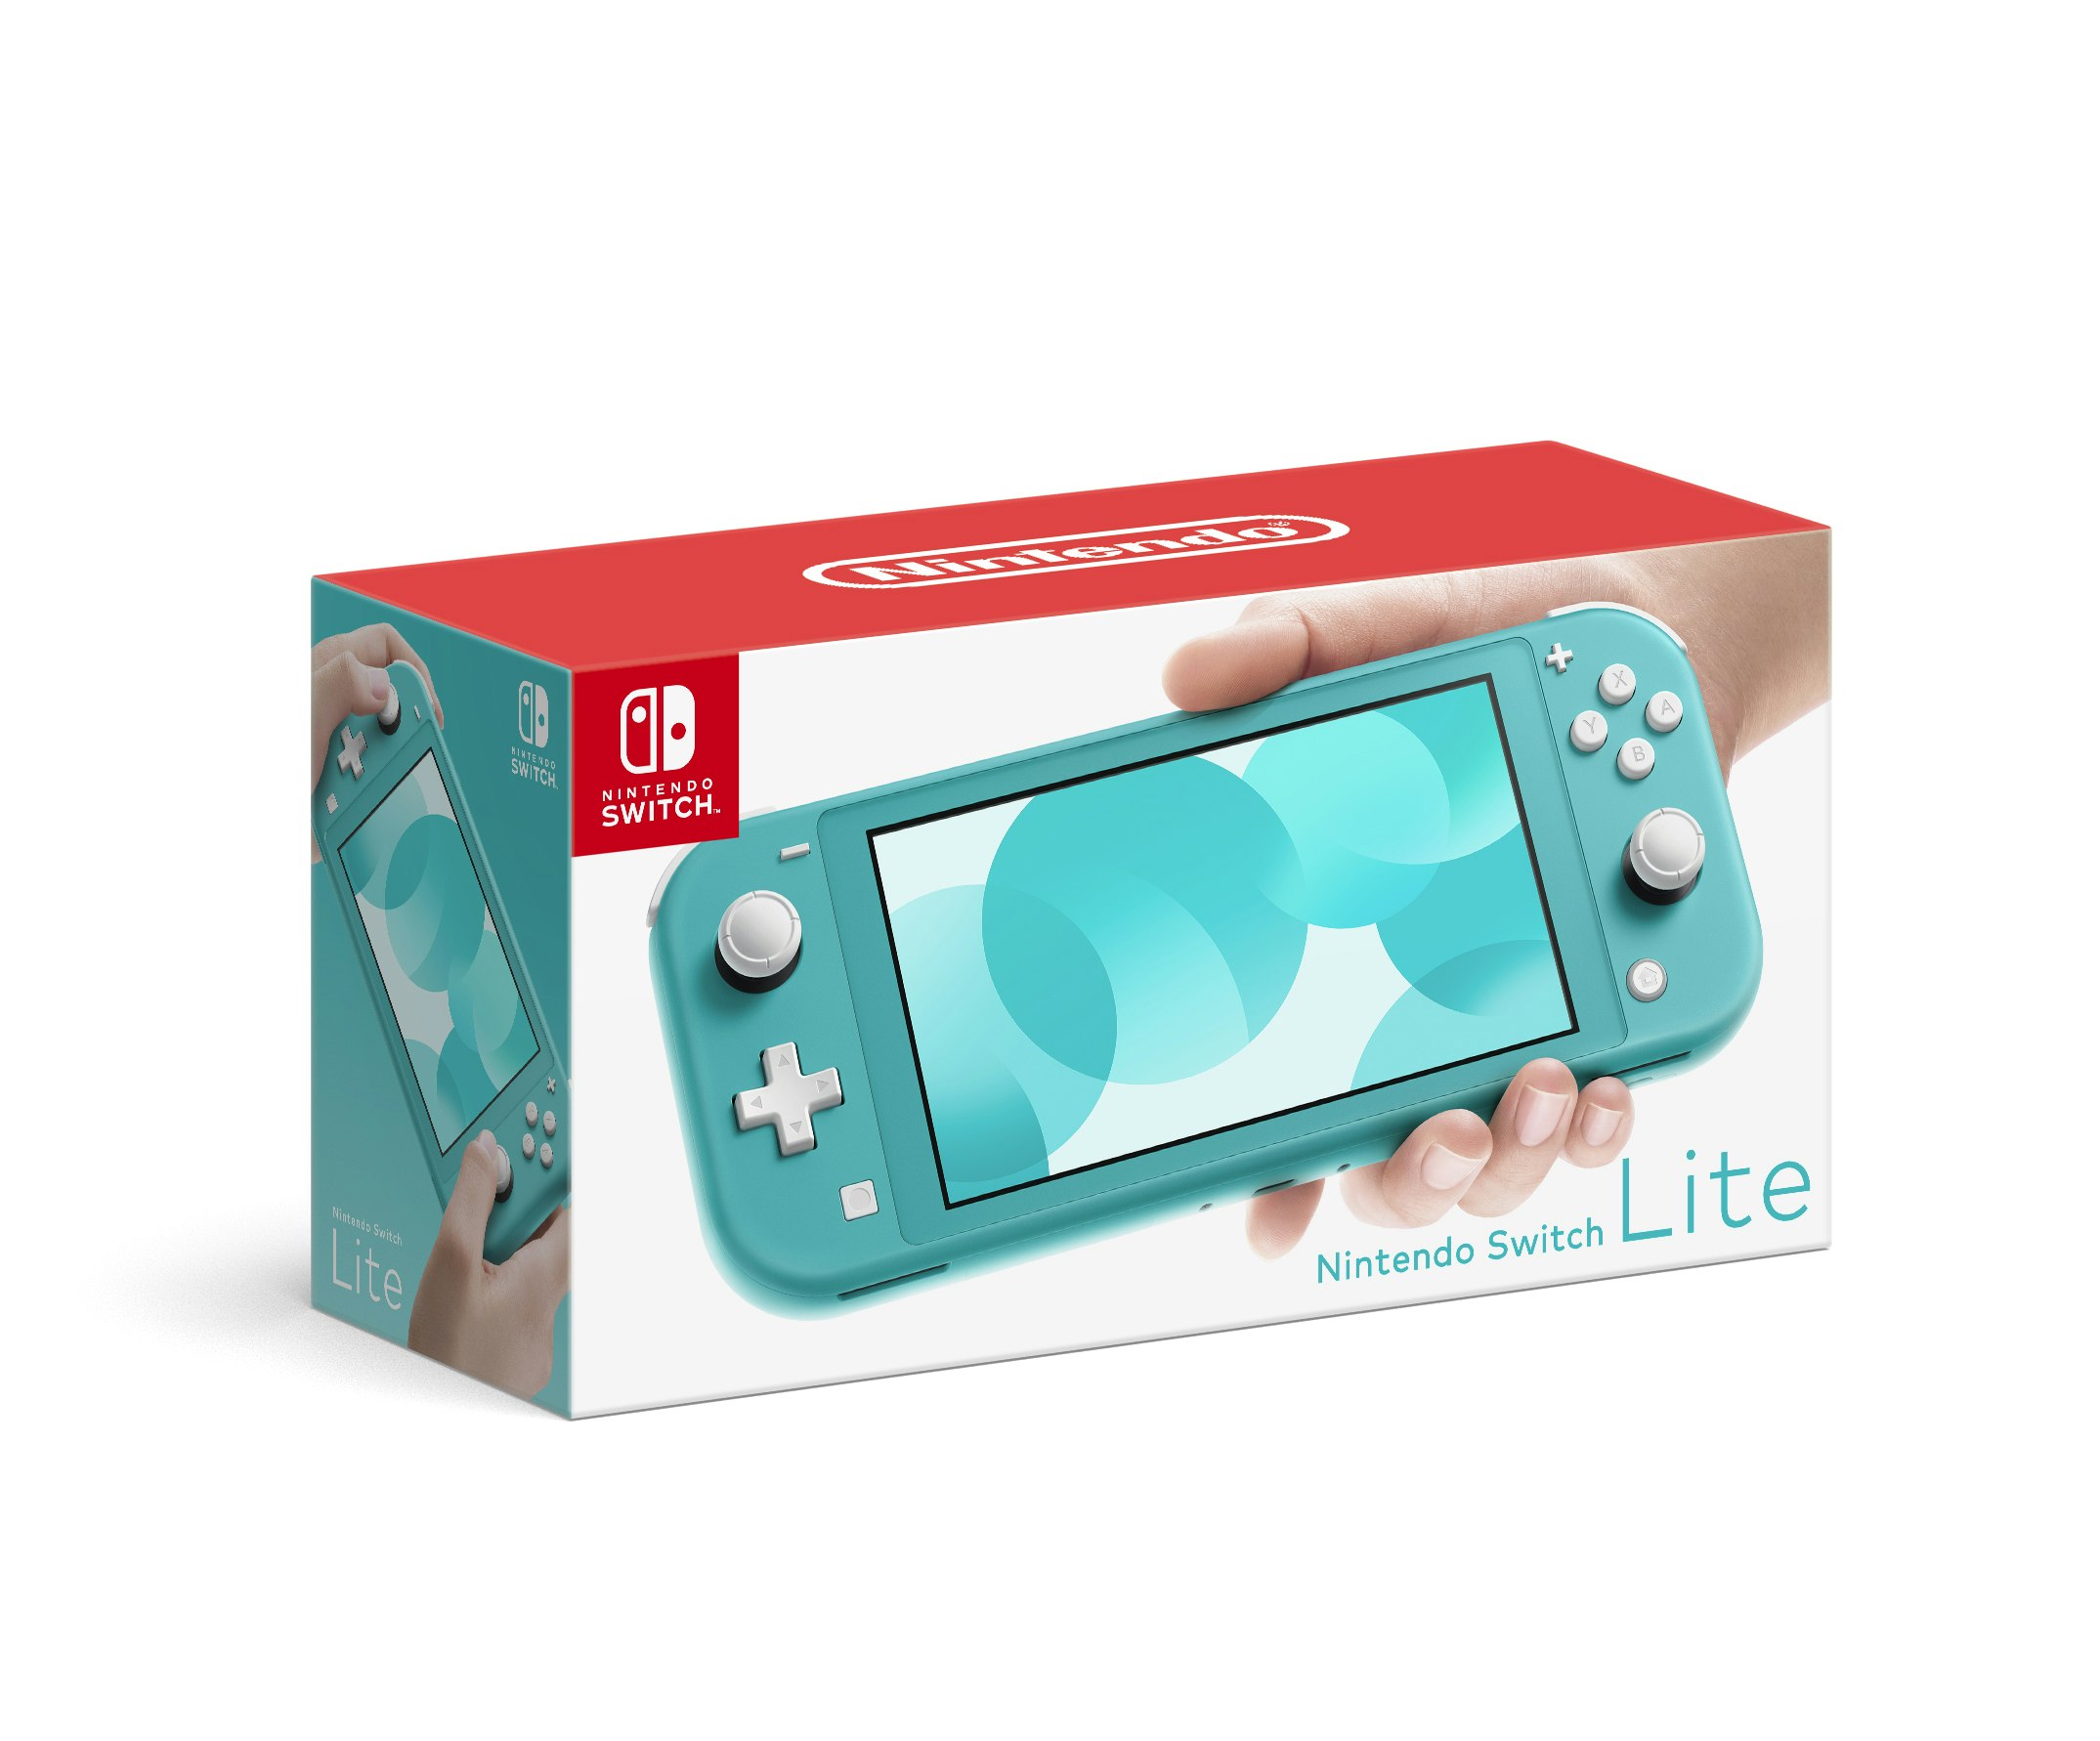 The box for the Nintendo Switch Lite